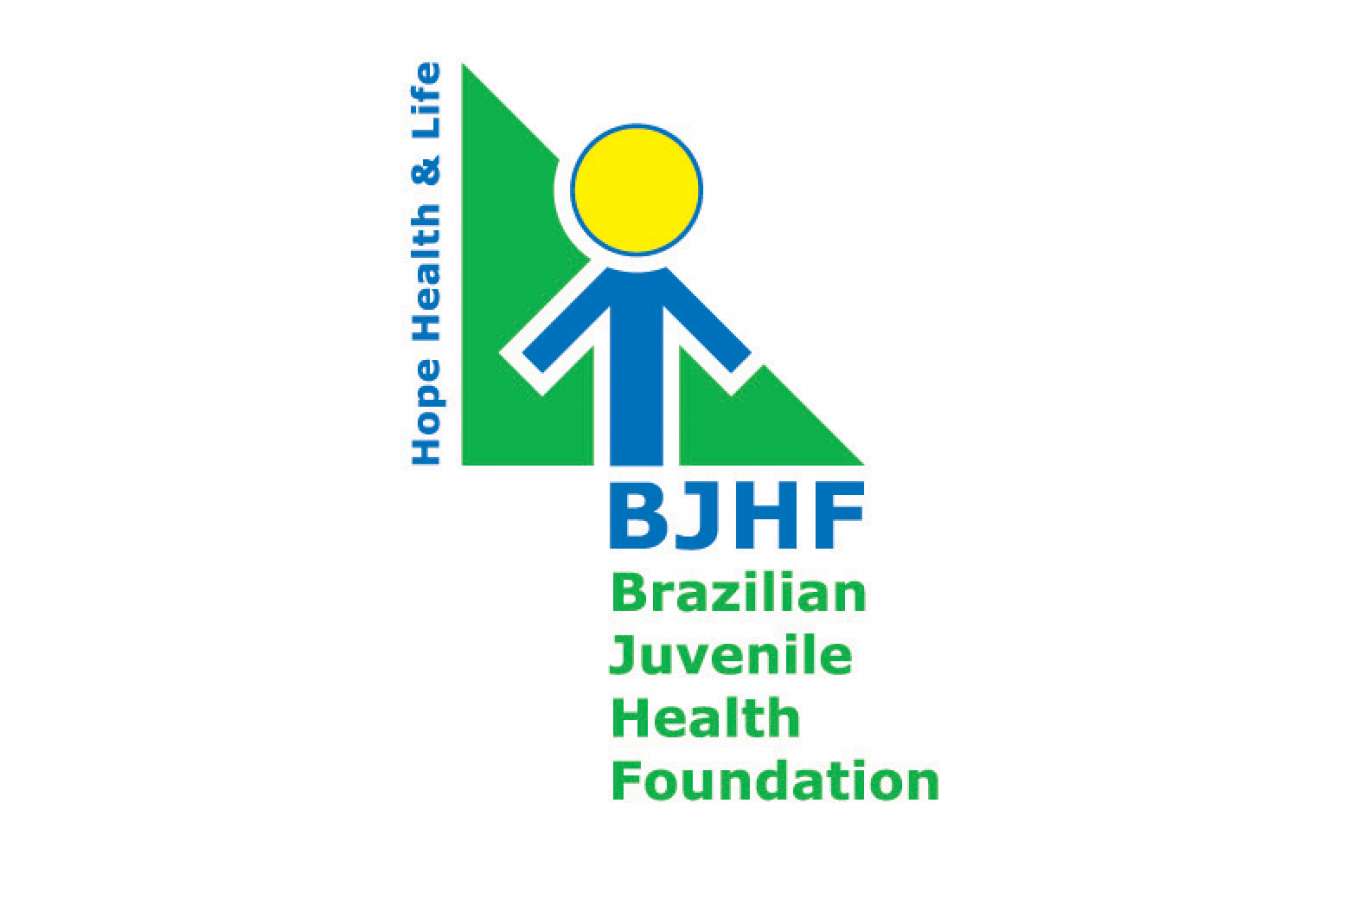 Logo 9 : BJHF provides insulin and other materials to Brazilian children in need